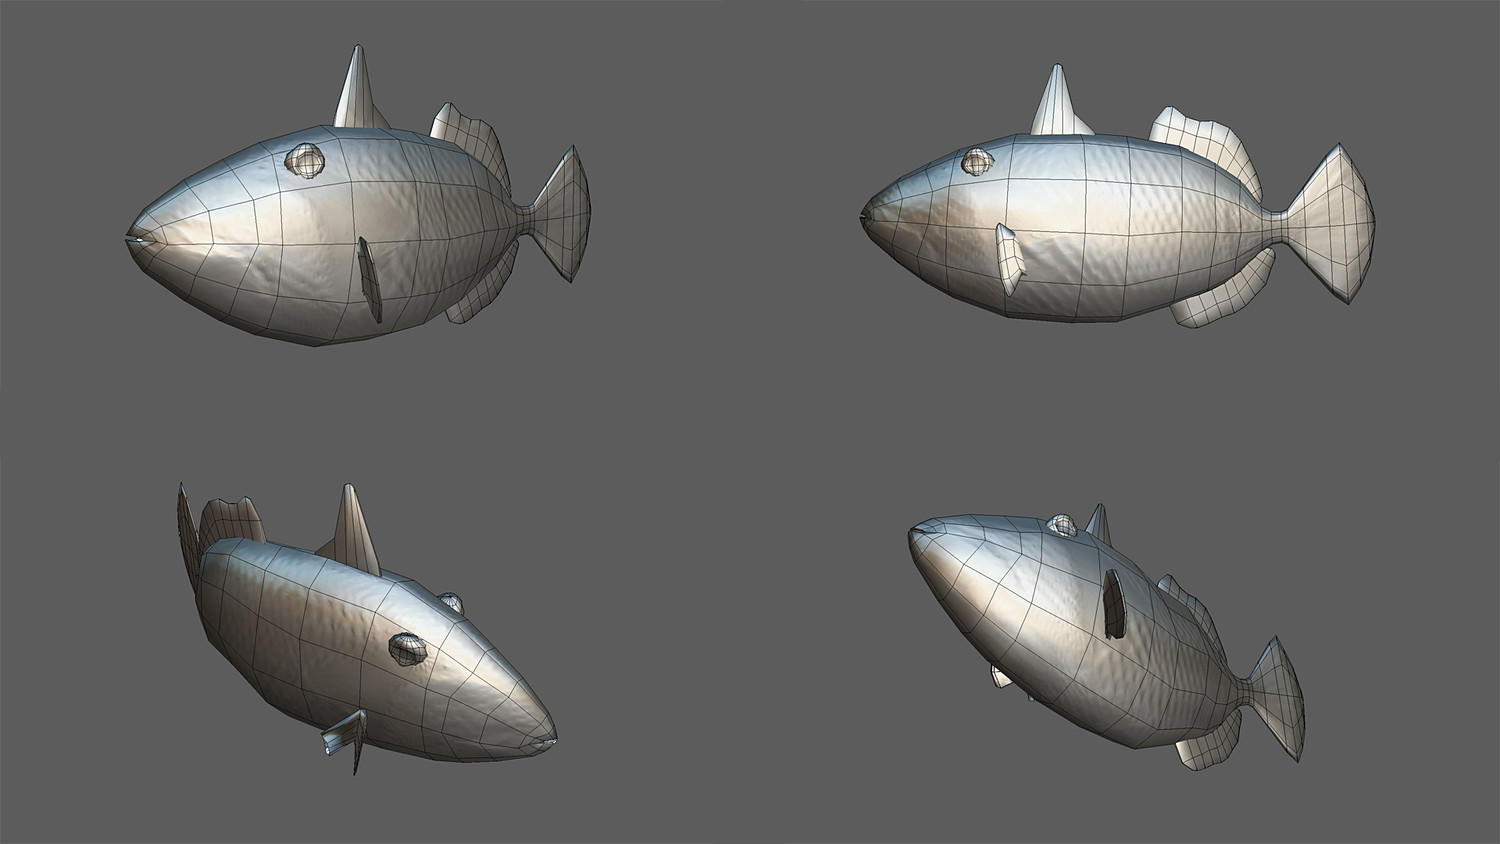 Low poly Fish Collection Animated Pack 4